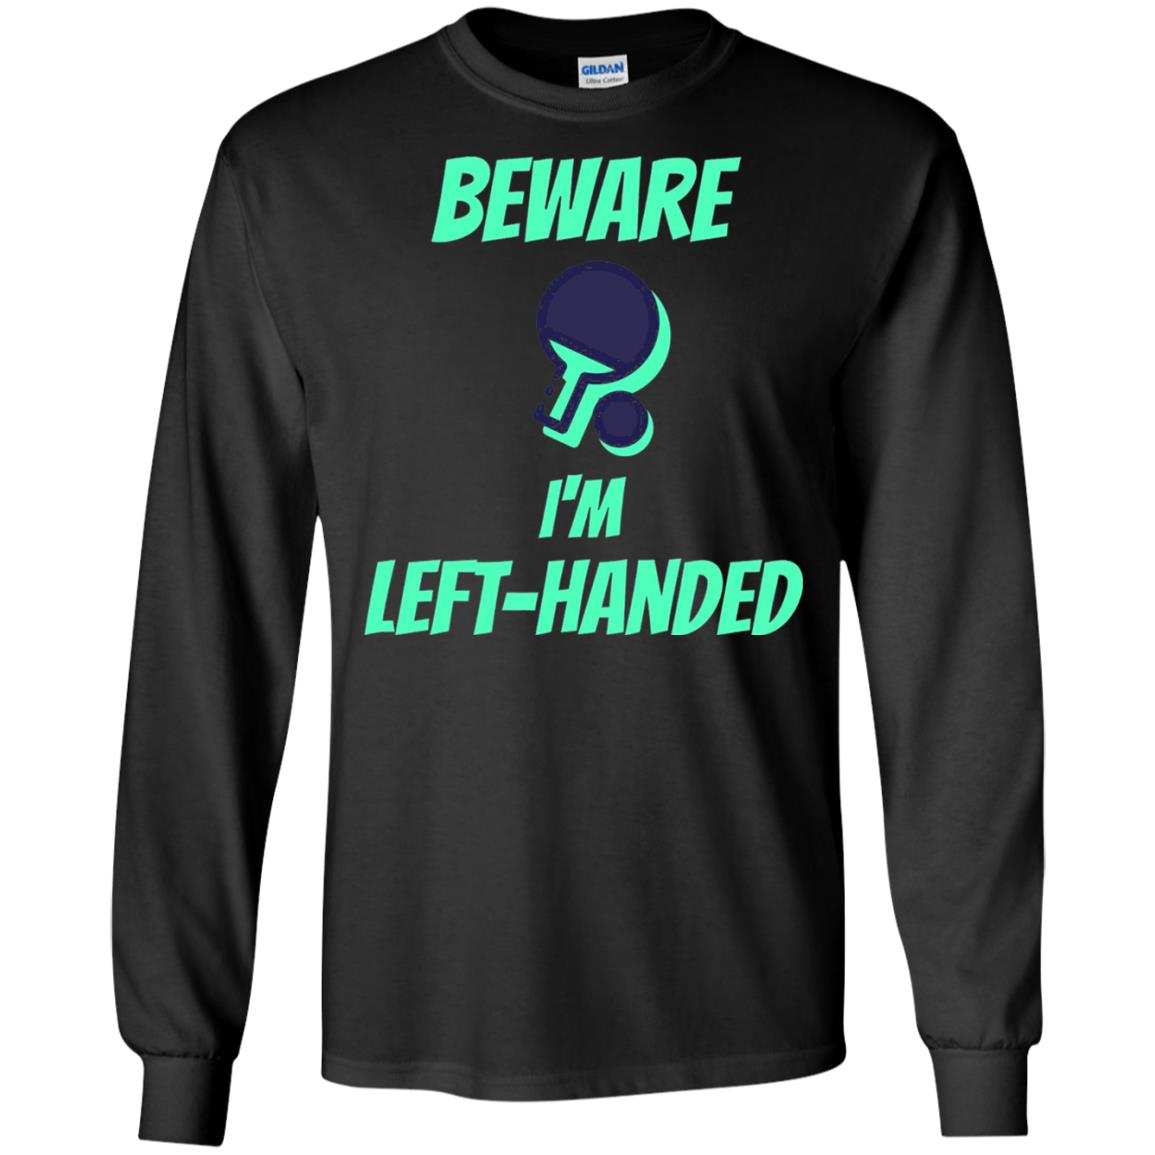 Table Tennis T-shirt Beware Im Left Handed Players